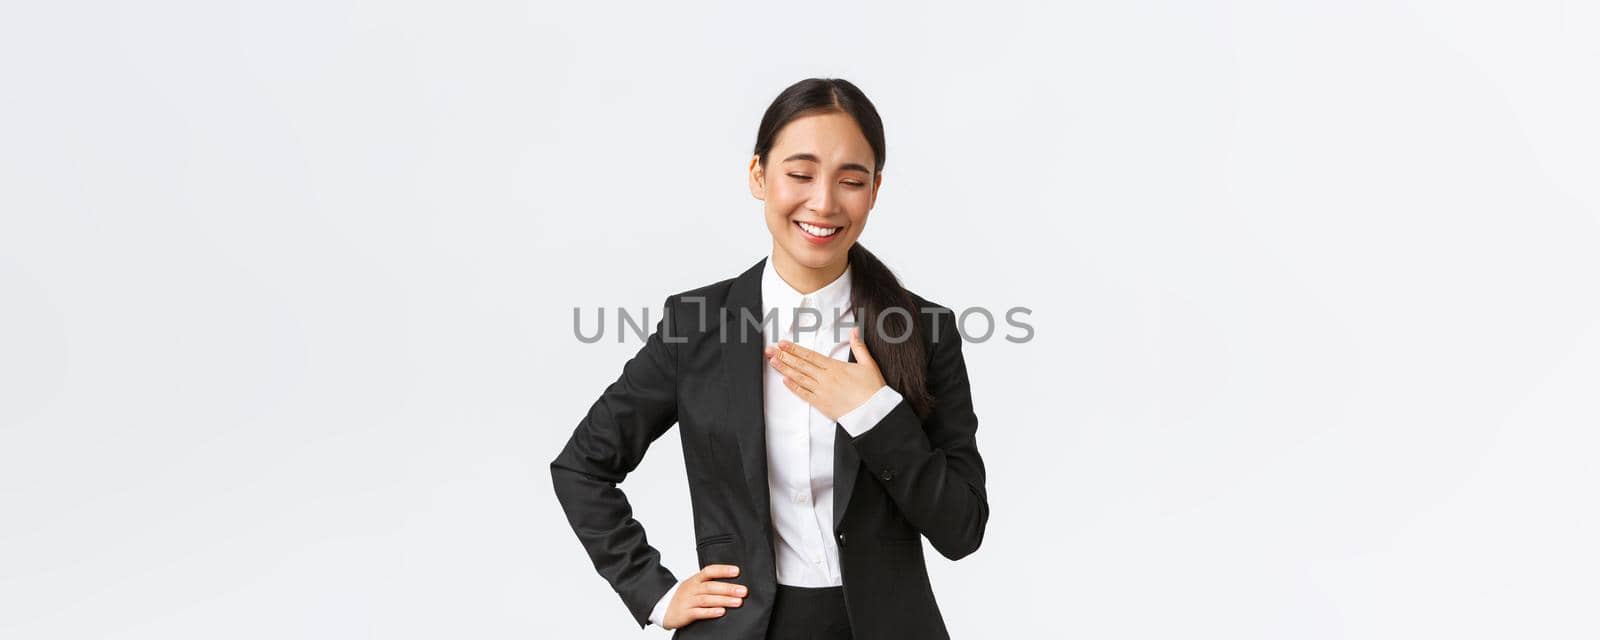 Professional successful businesswoman in black suit having conversation, laughing and touching chest as her something funny or flattering, being praised for good job at work, white background.